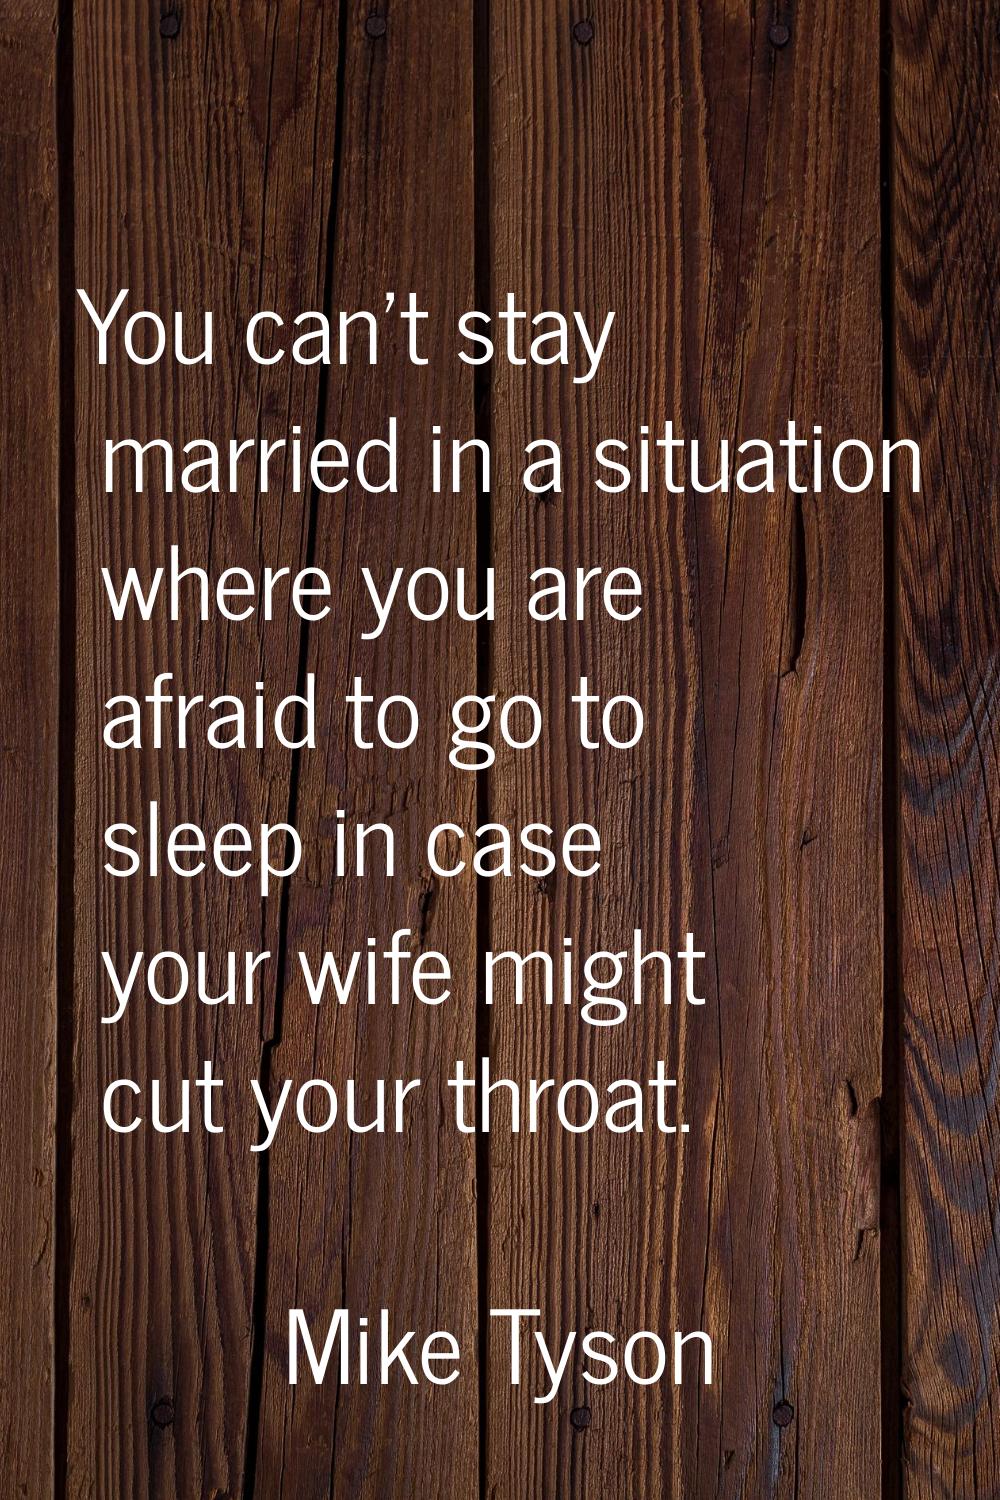 You can't stay married in a situation where you are afraid to go to sleep in case your wife might c